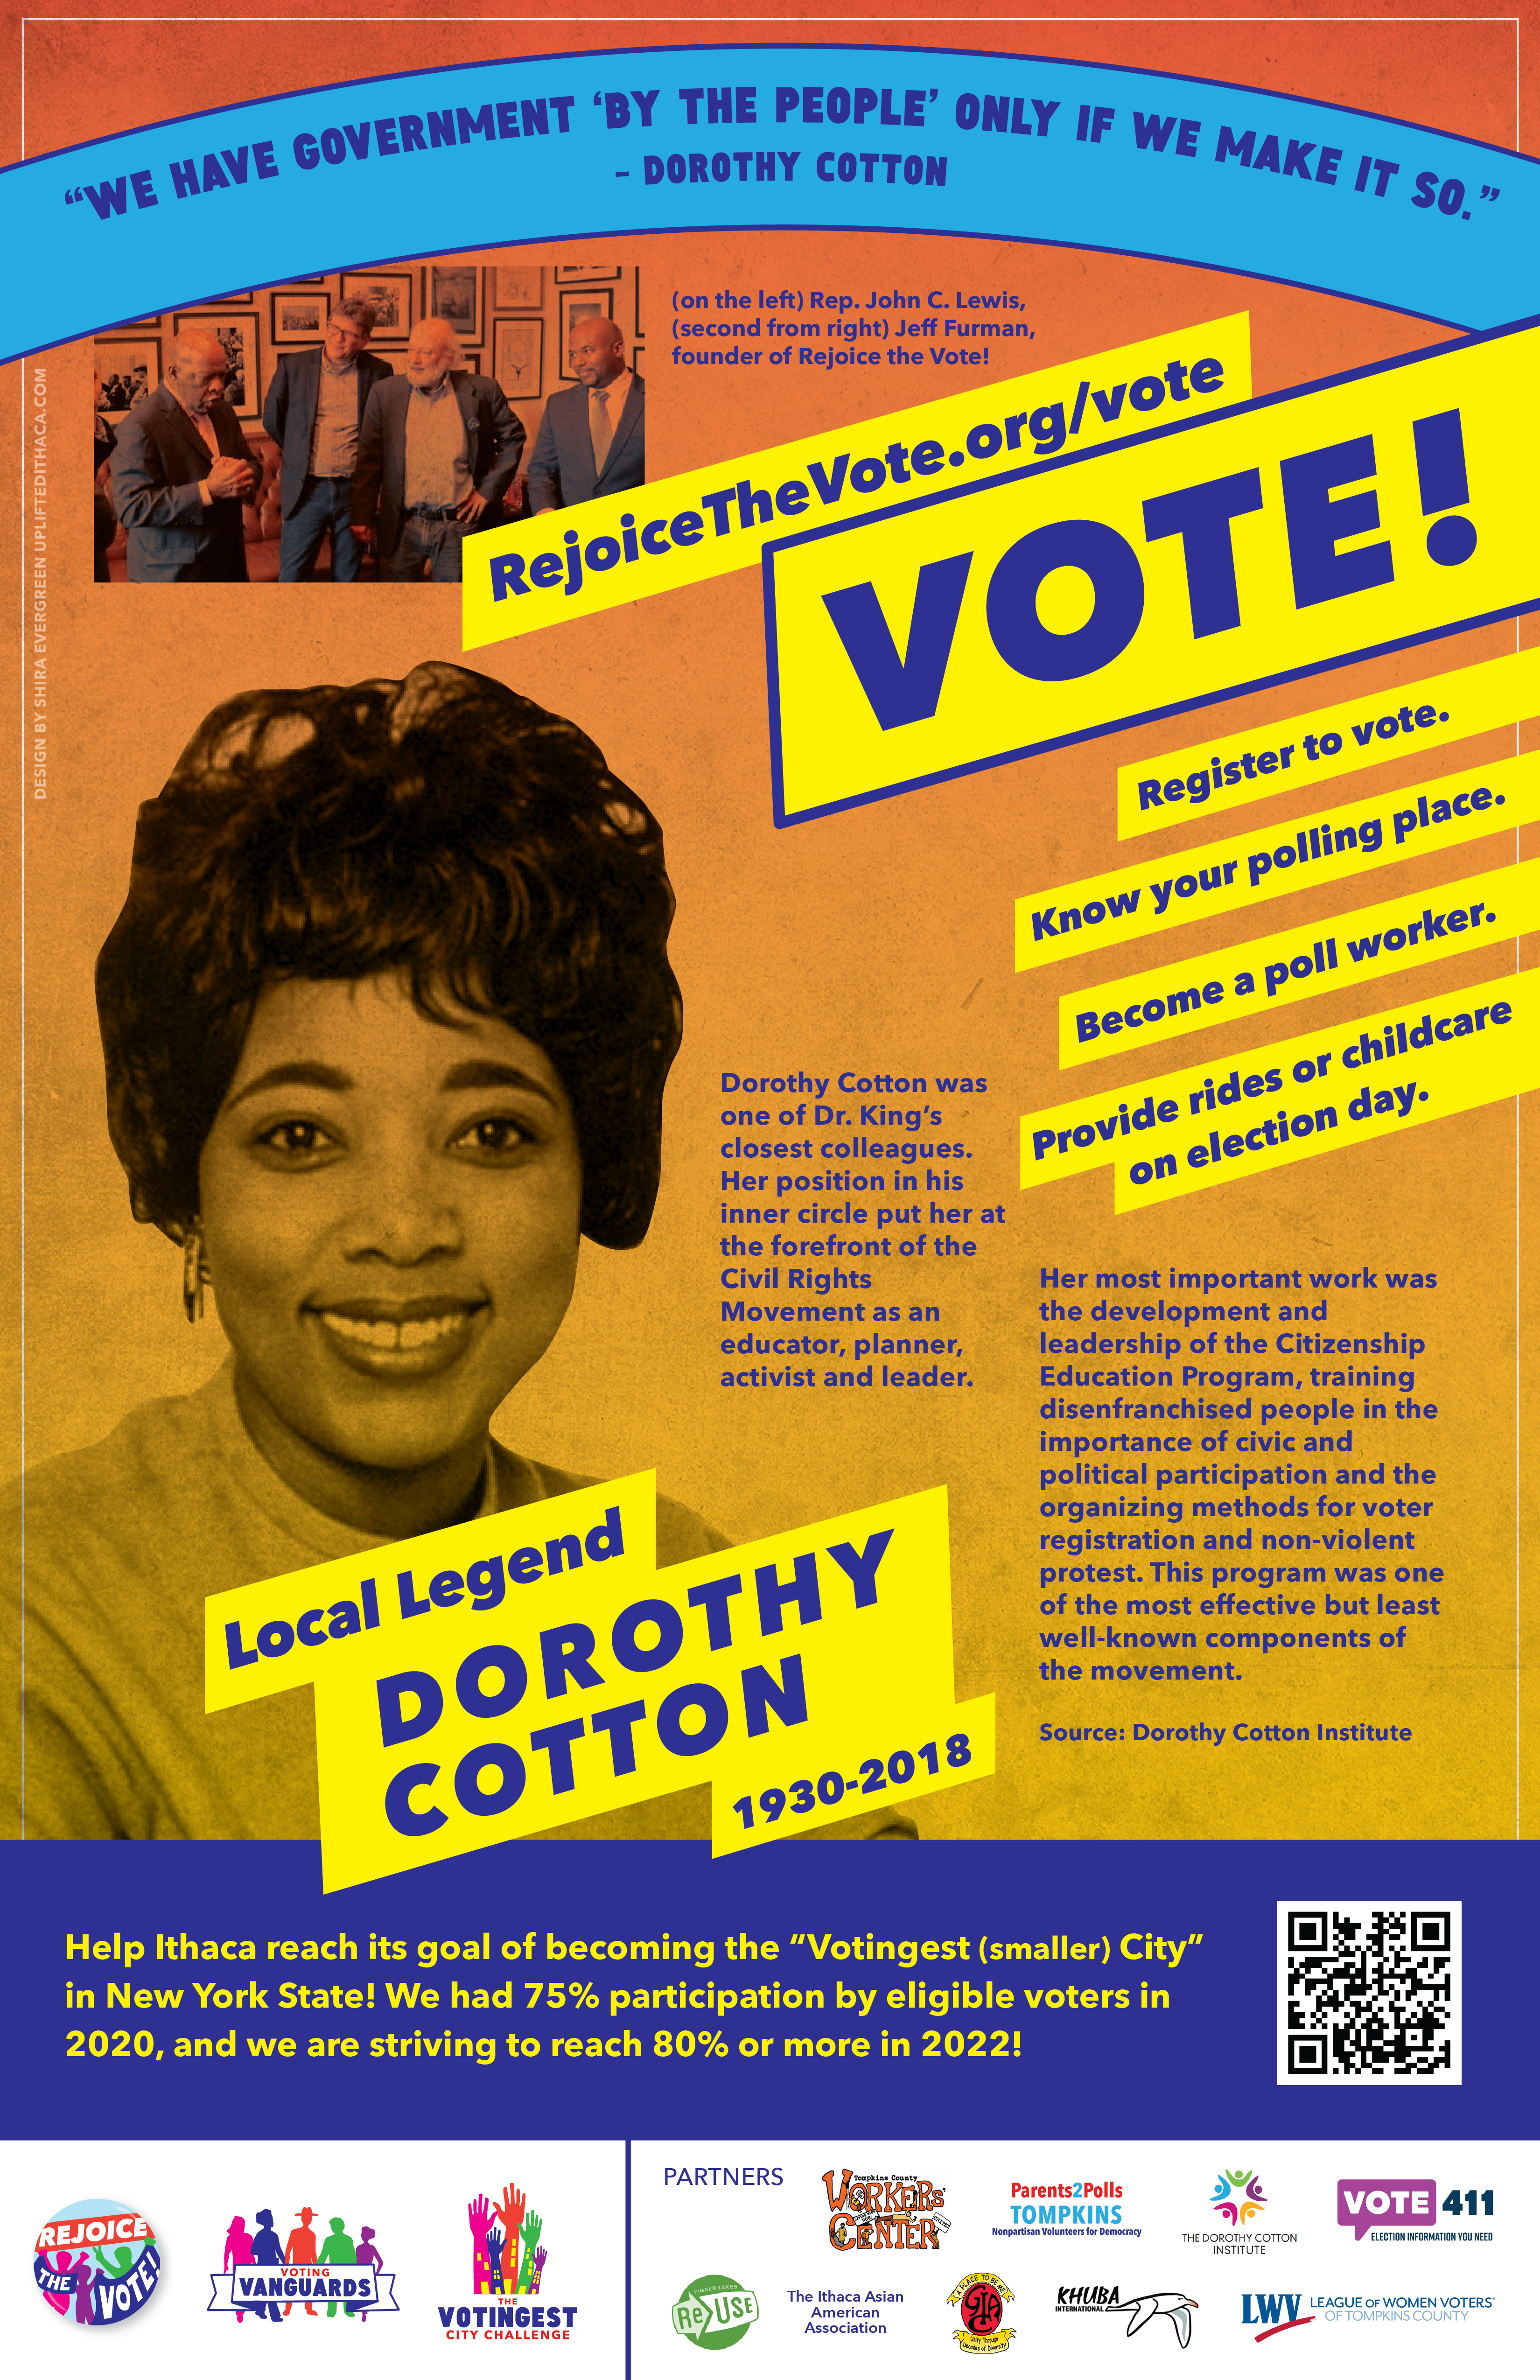 dorothy cotton poster